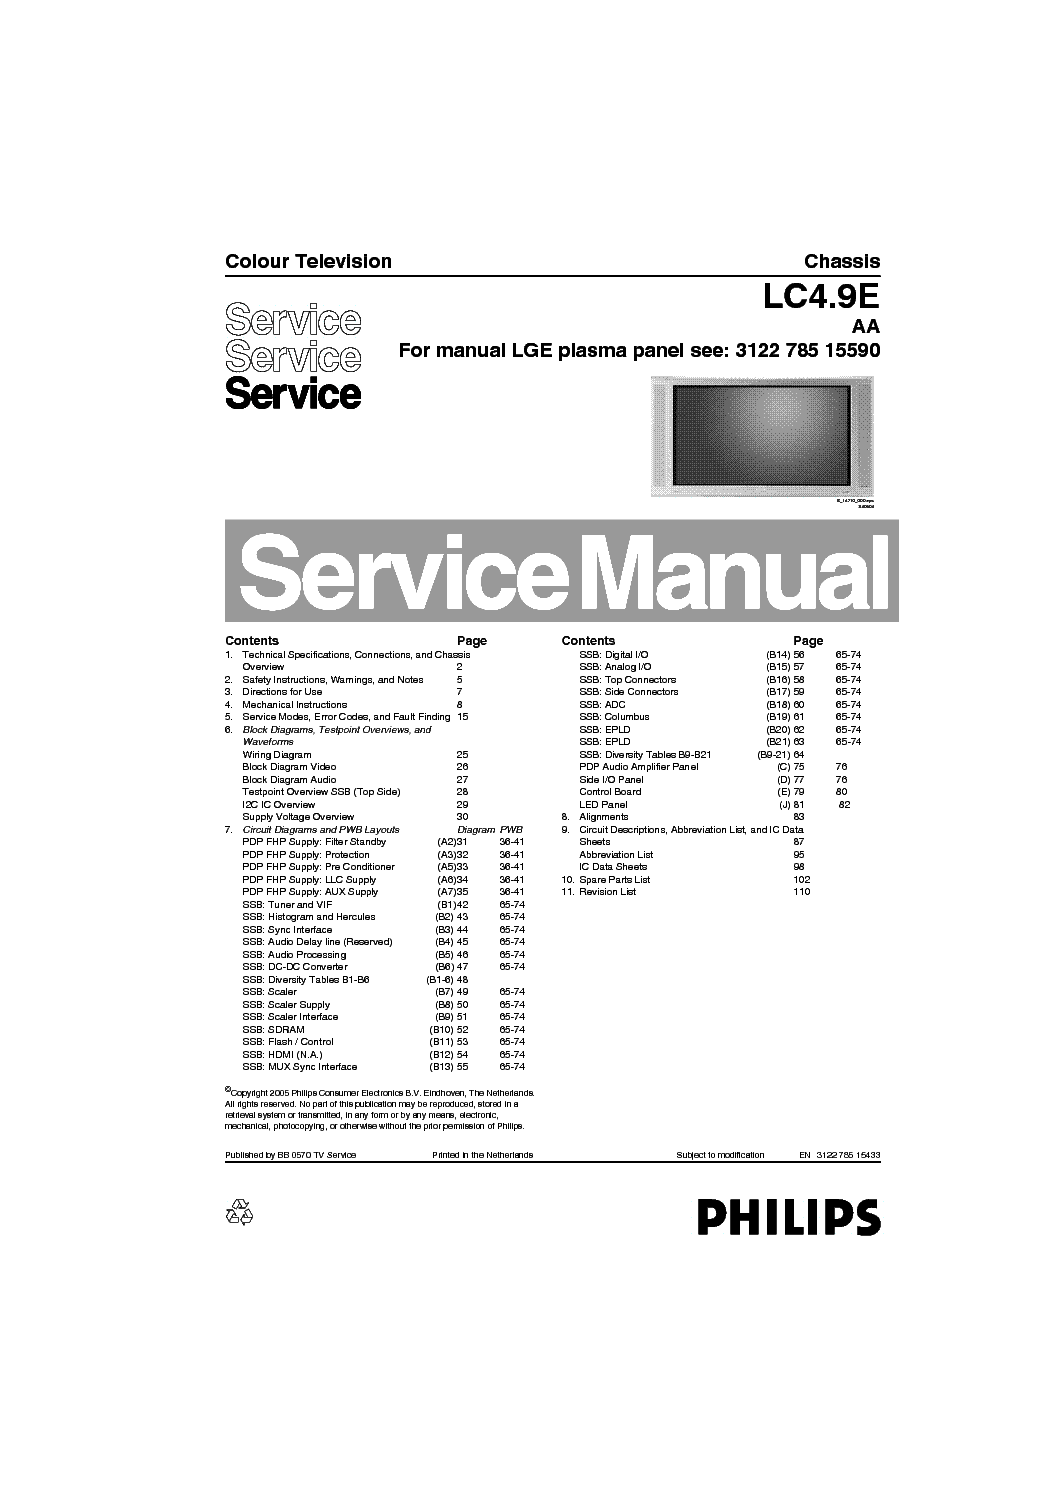 PHILIPS LC4.9EAA 312278515433 LG service manual (1st page)